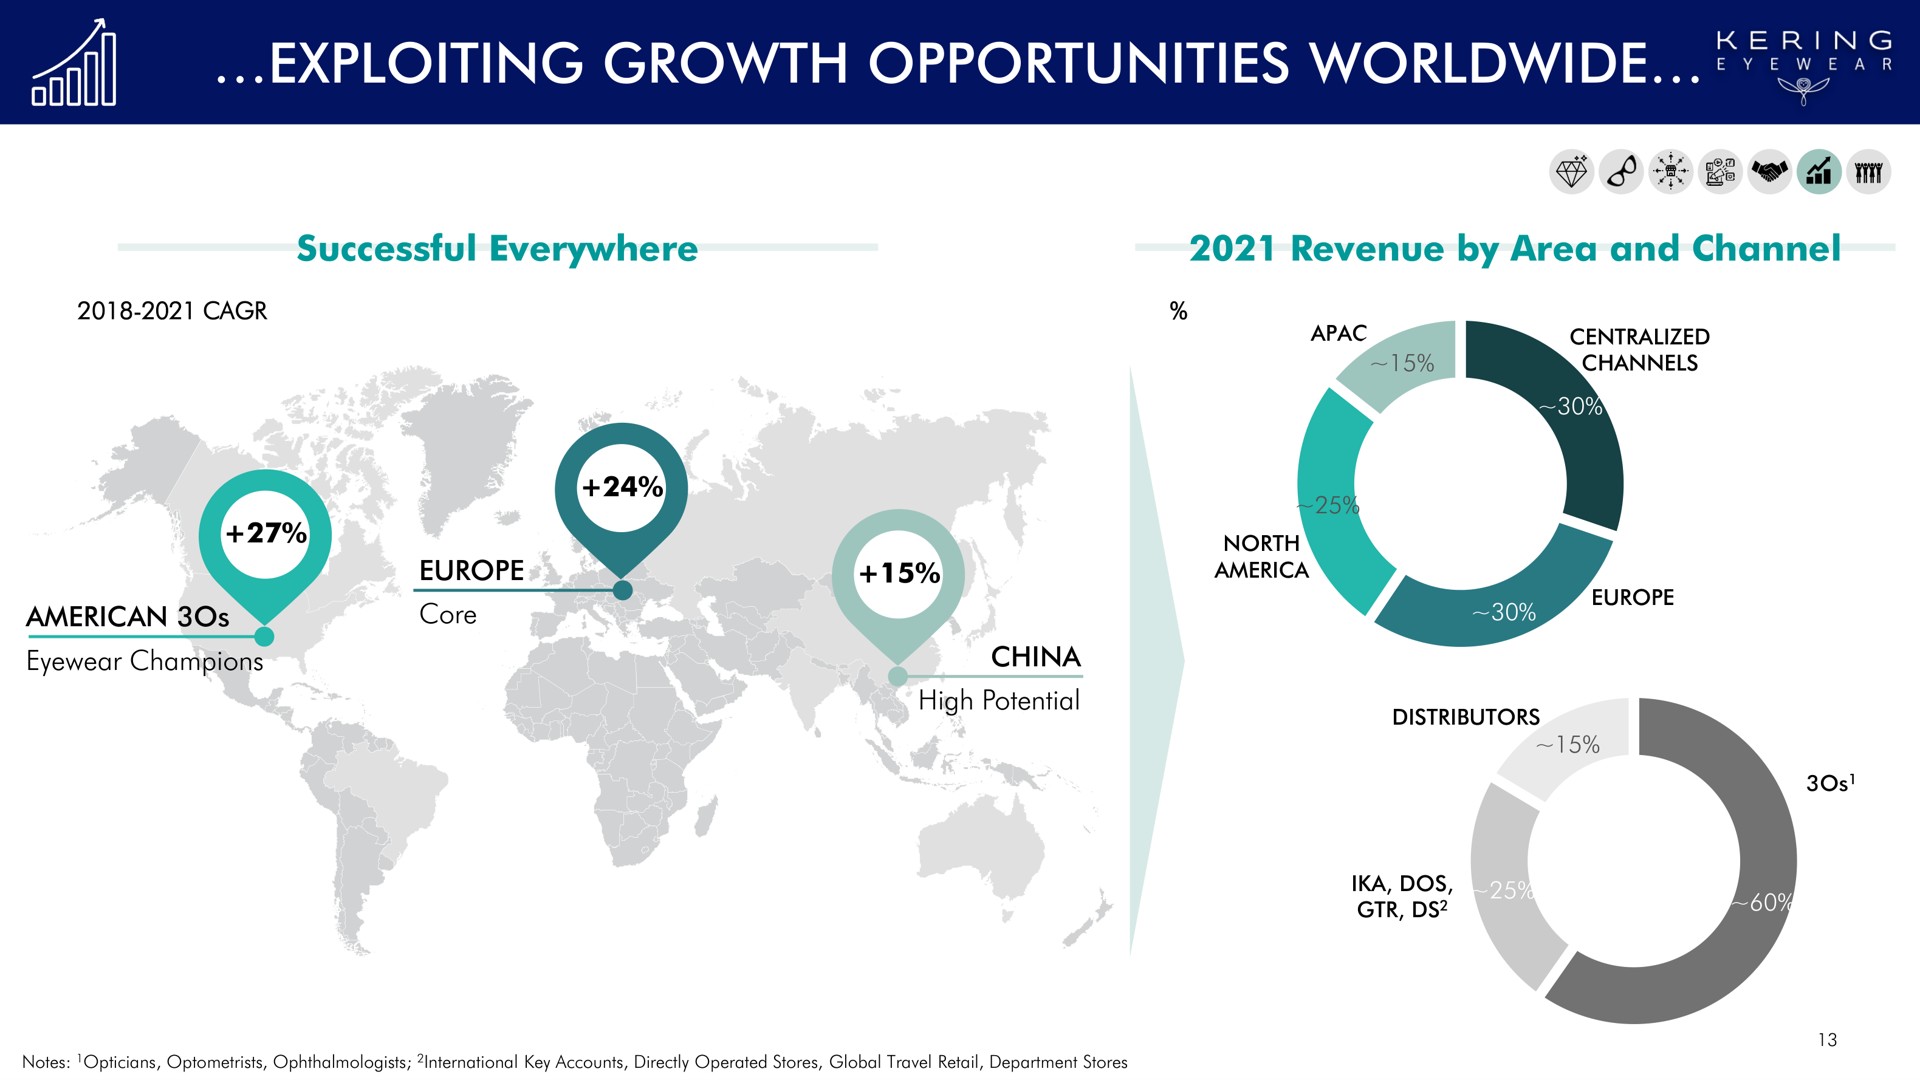 exploiting growth opportunities ate | Kering